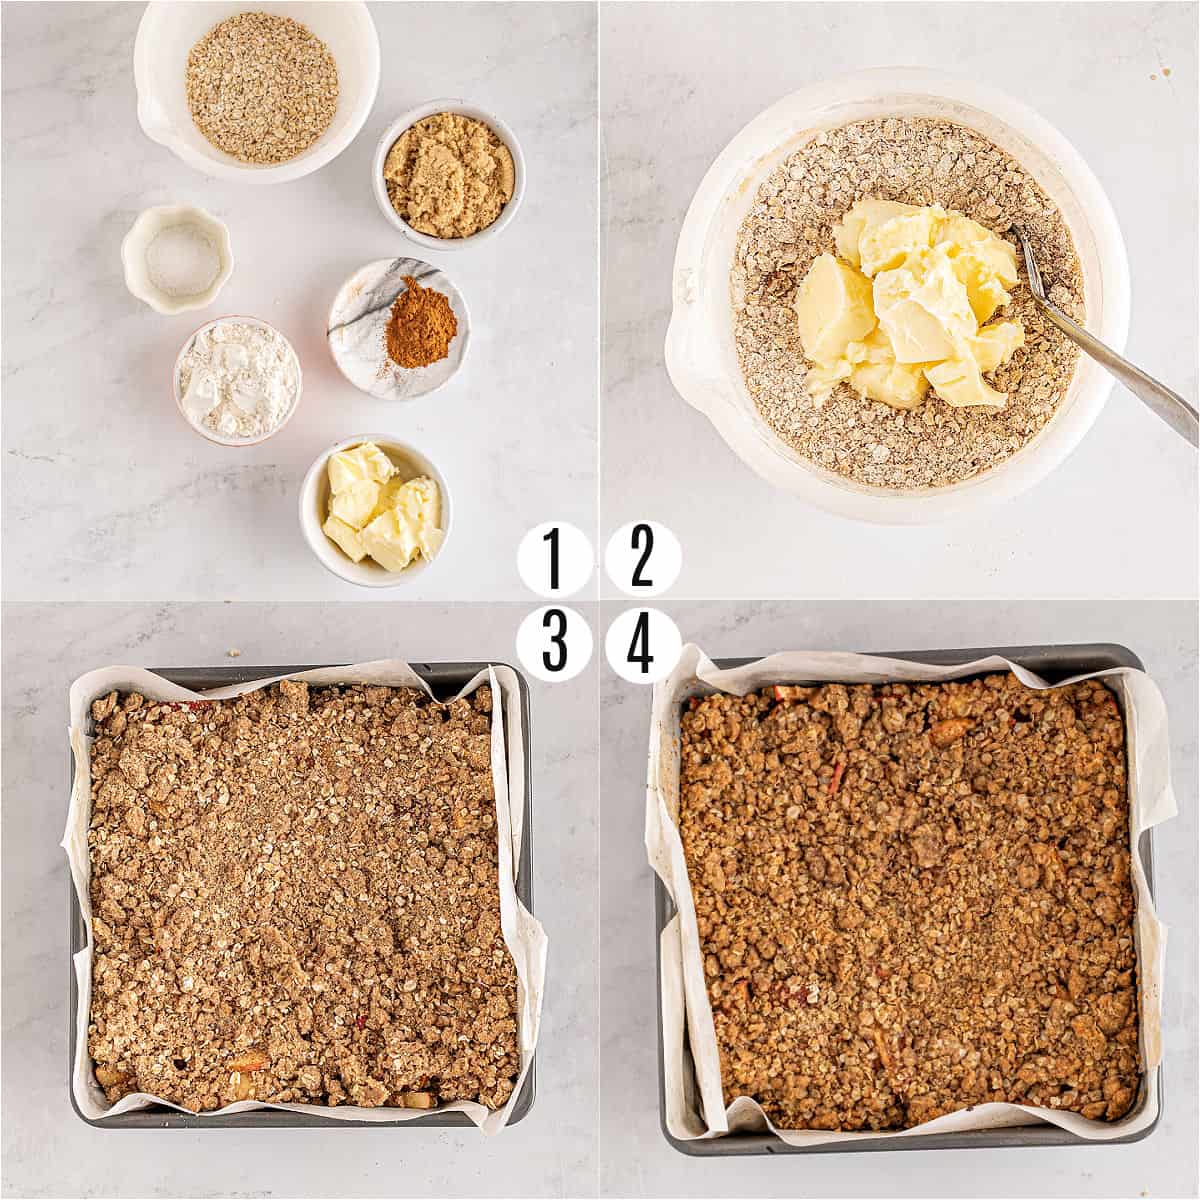 Step by step photos showing how to make apple pie bar topping.